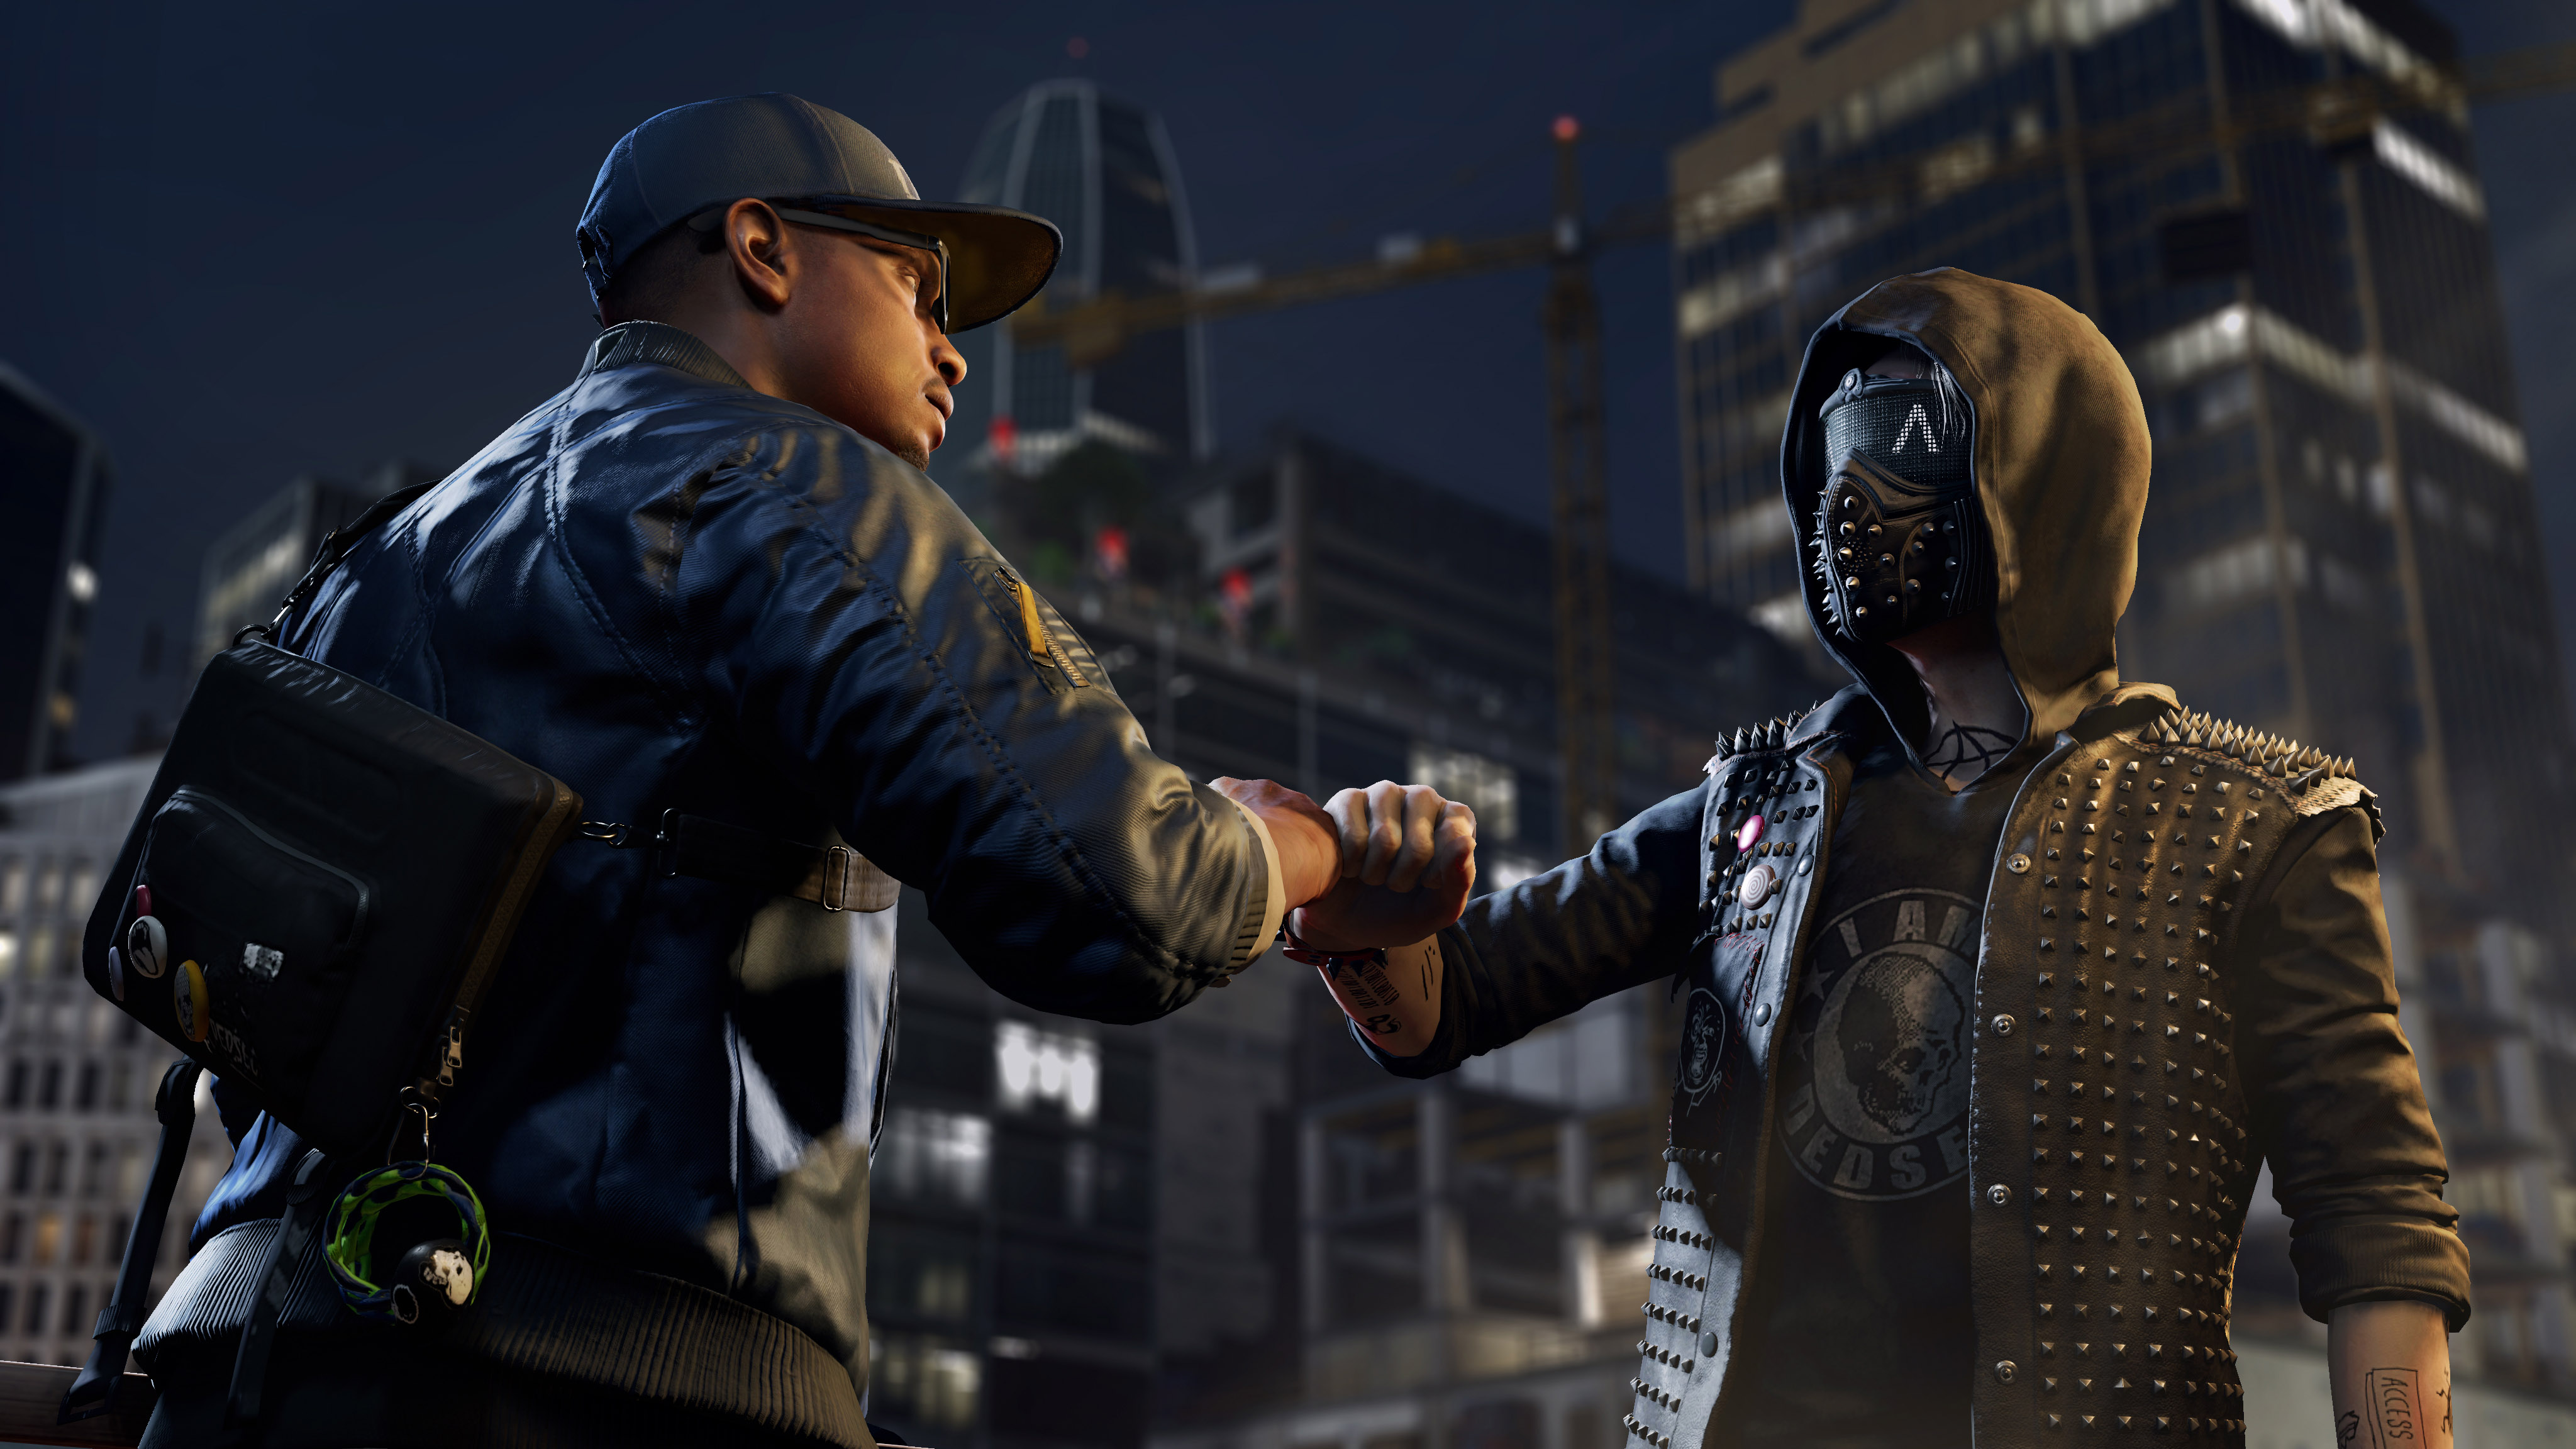 Watch dogs k hd hd games k wallpapers images backgrounds photos and pictures